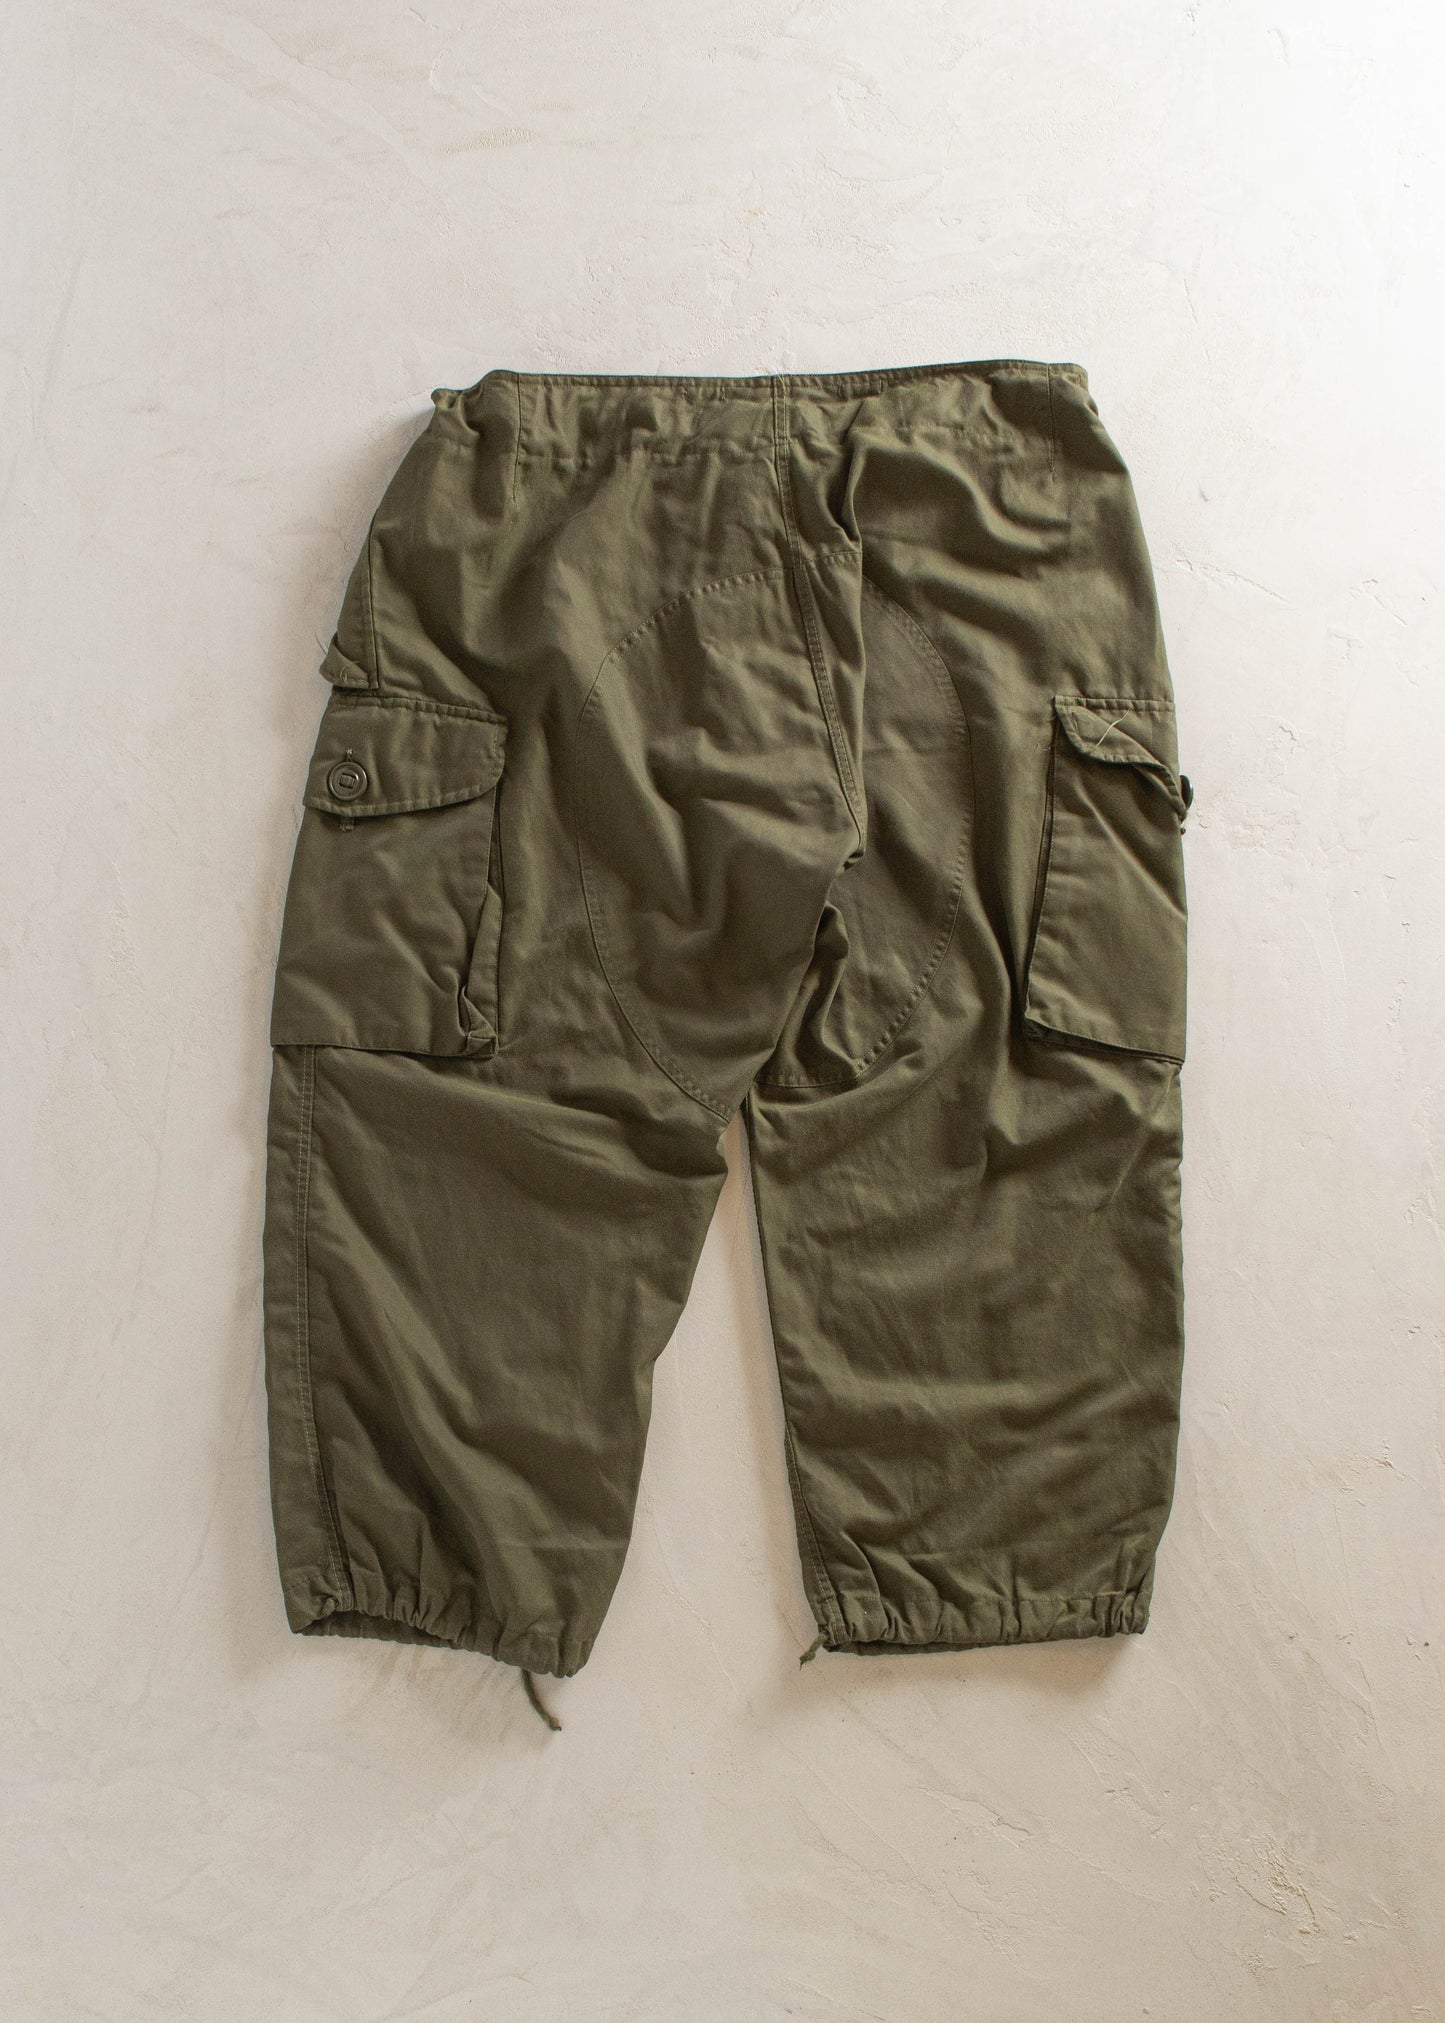 1970s Military Wind Cargo Pants Size 2XL/3XL